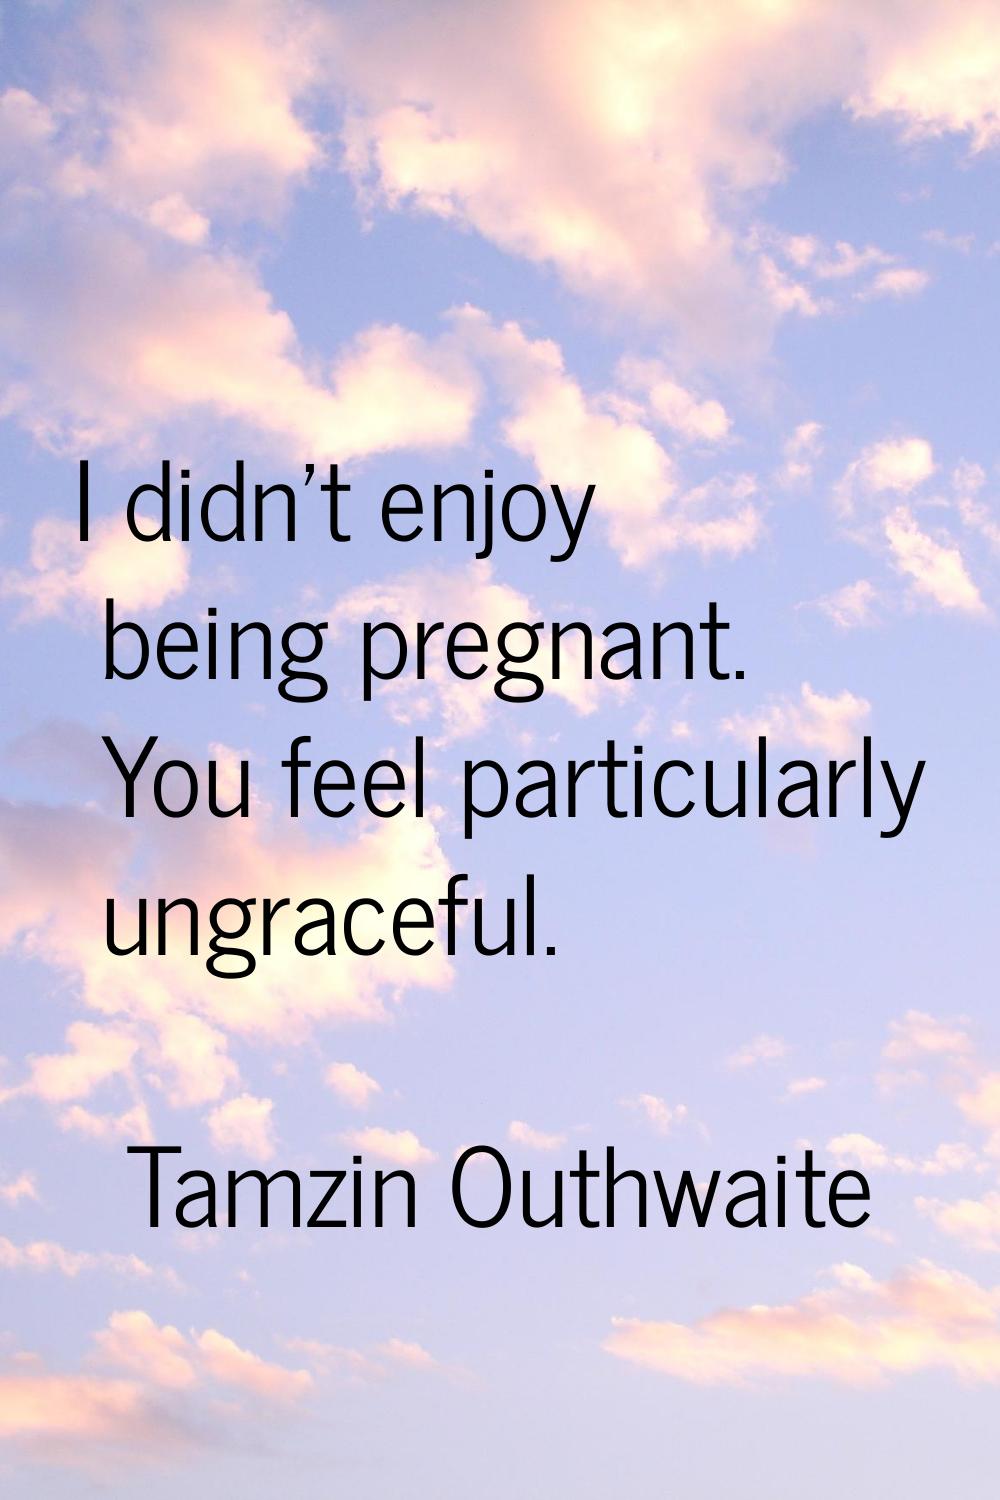 I didn't enjoy being pregnant. You feel particularly ungraceful.